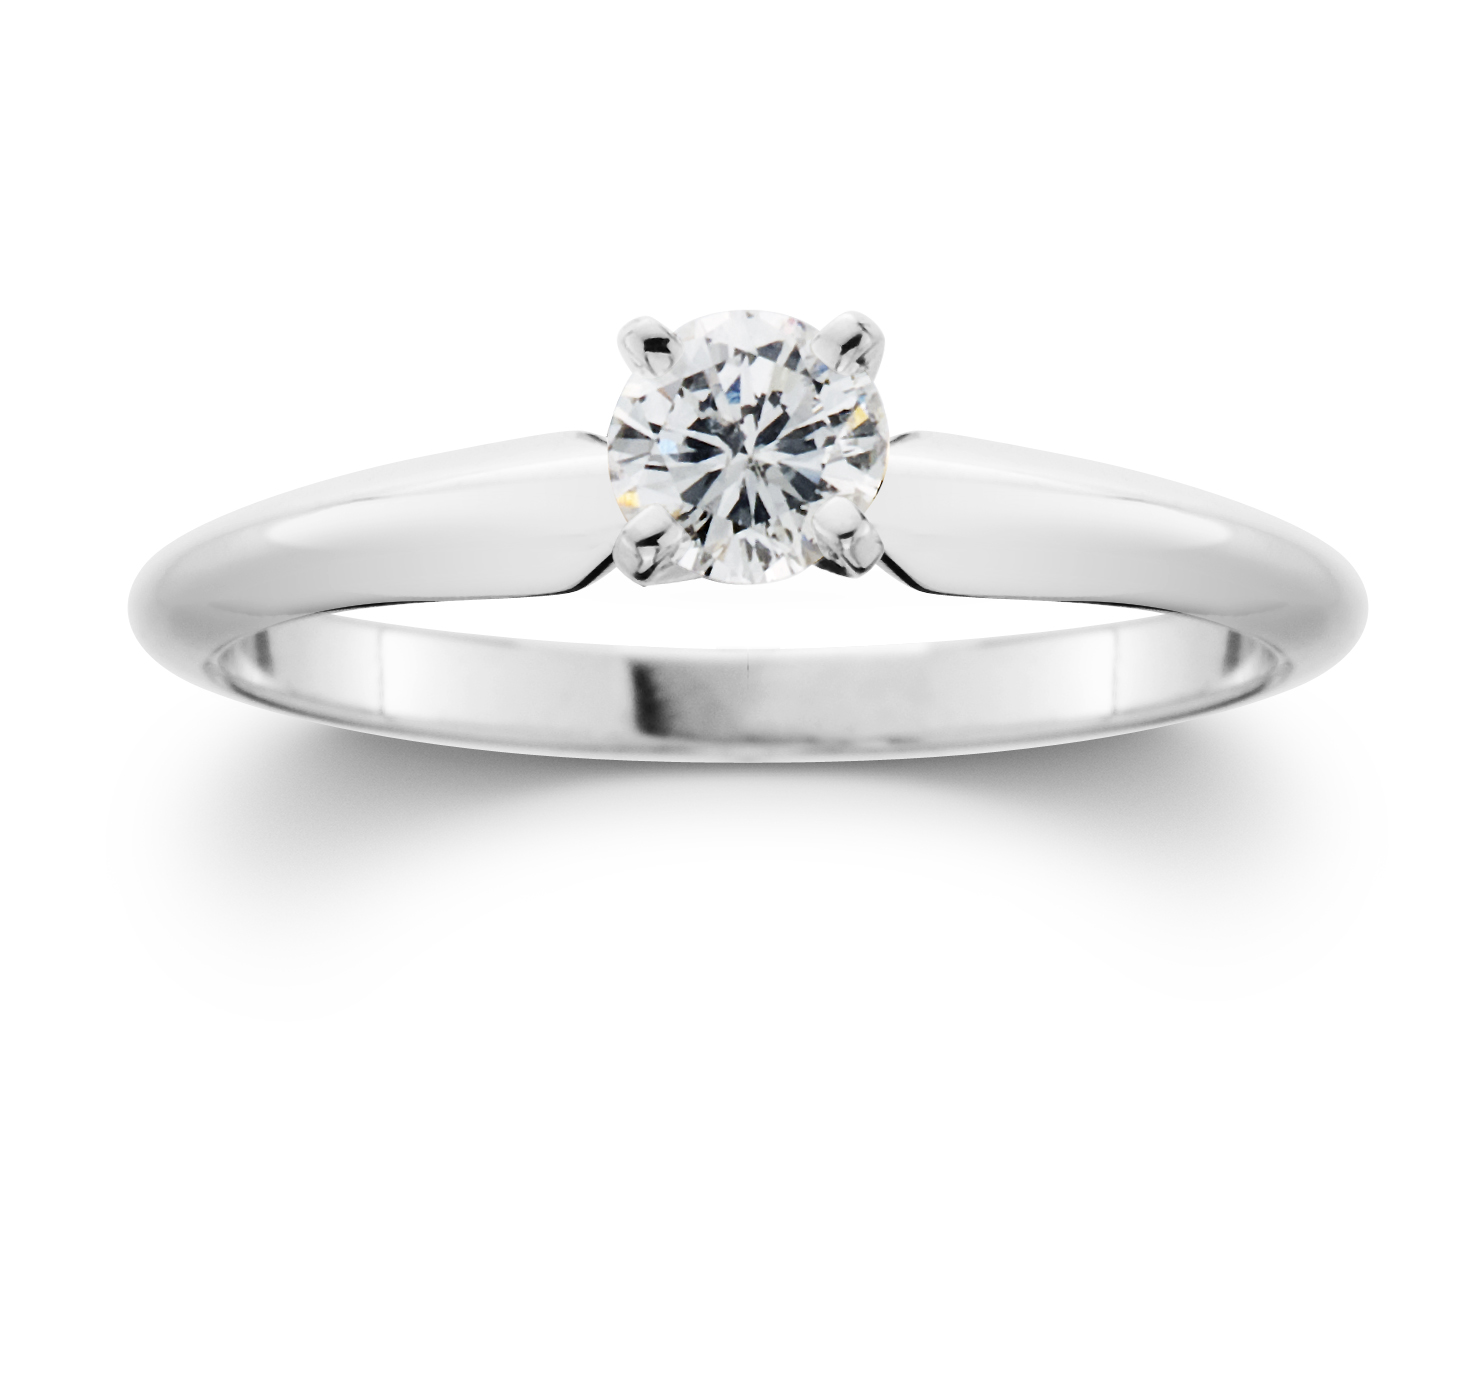 10K White Gold 1/4 CTTW Certified Diamond Round Solitaire Ring